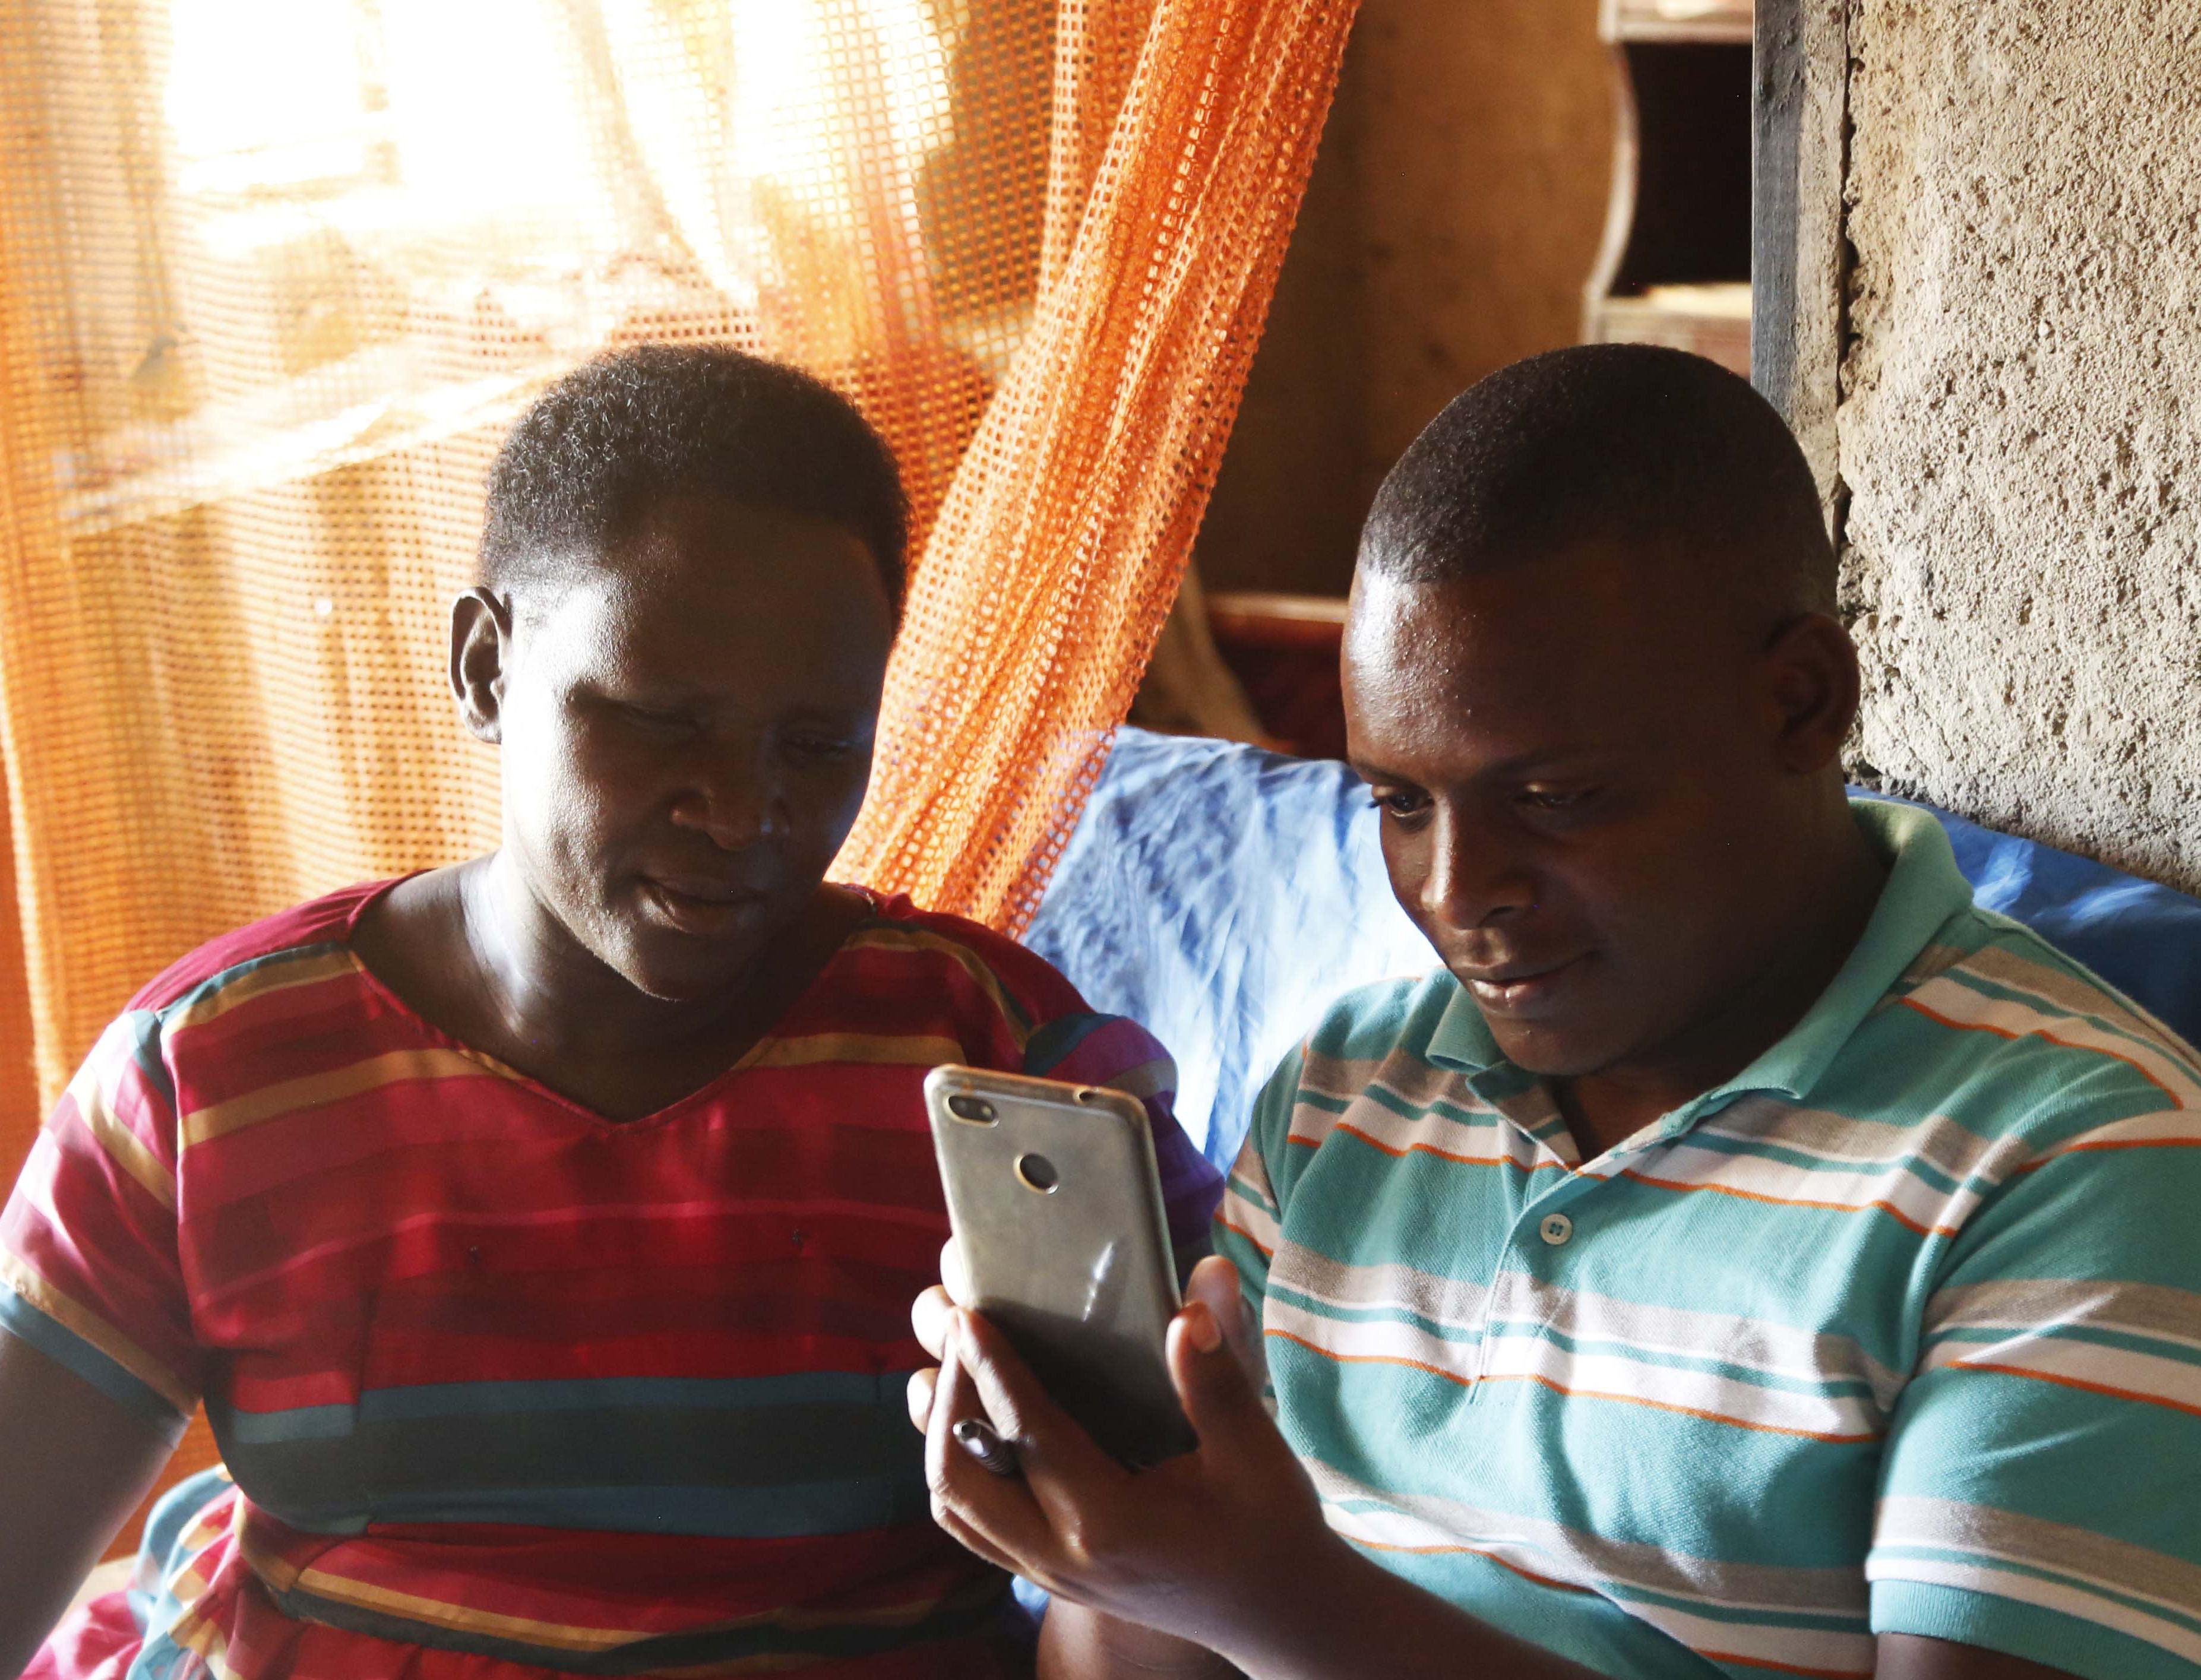 An IPA enumerator (right) shows a faith leader how to use a smartphone for the Becoming One program. © 2018 Aude Guerrucci